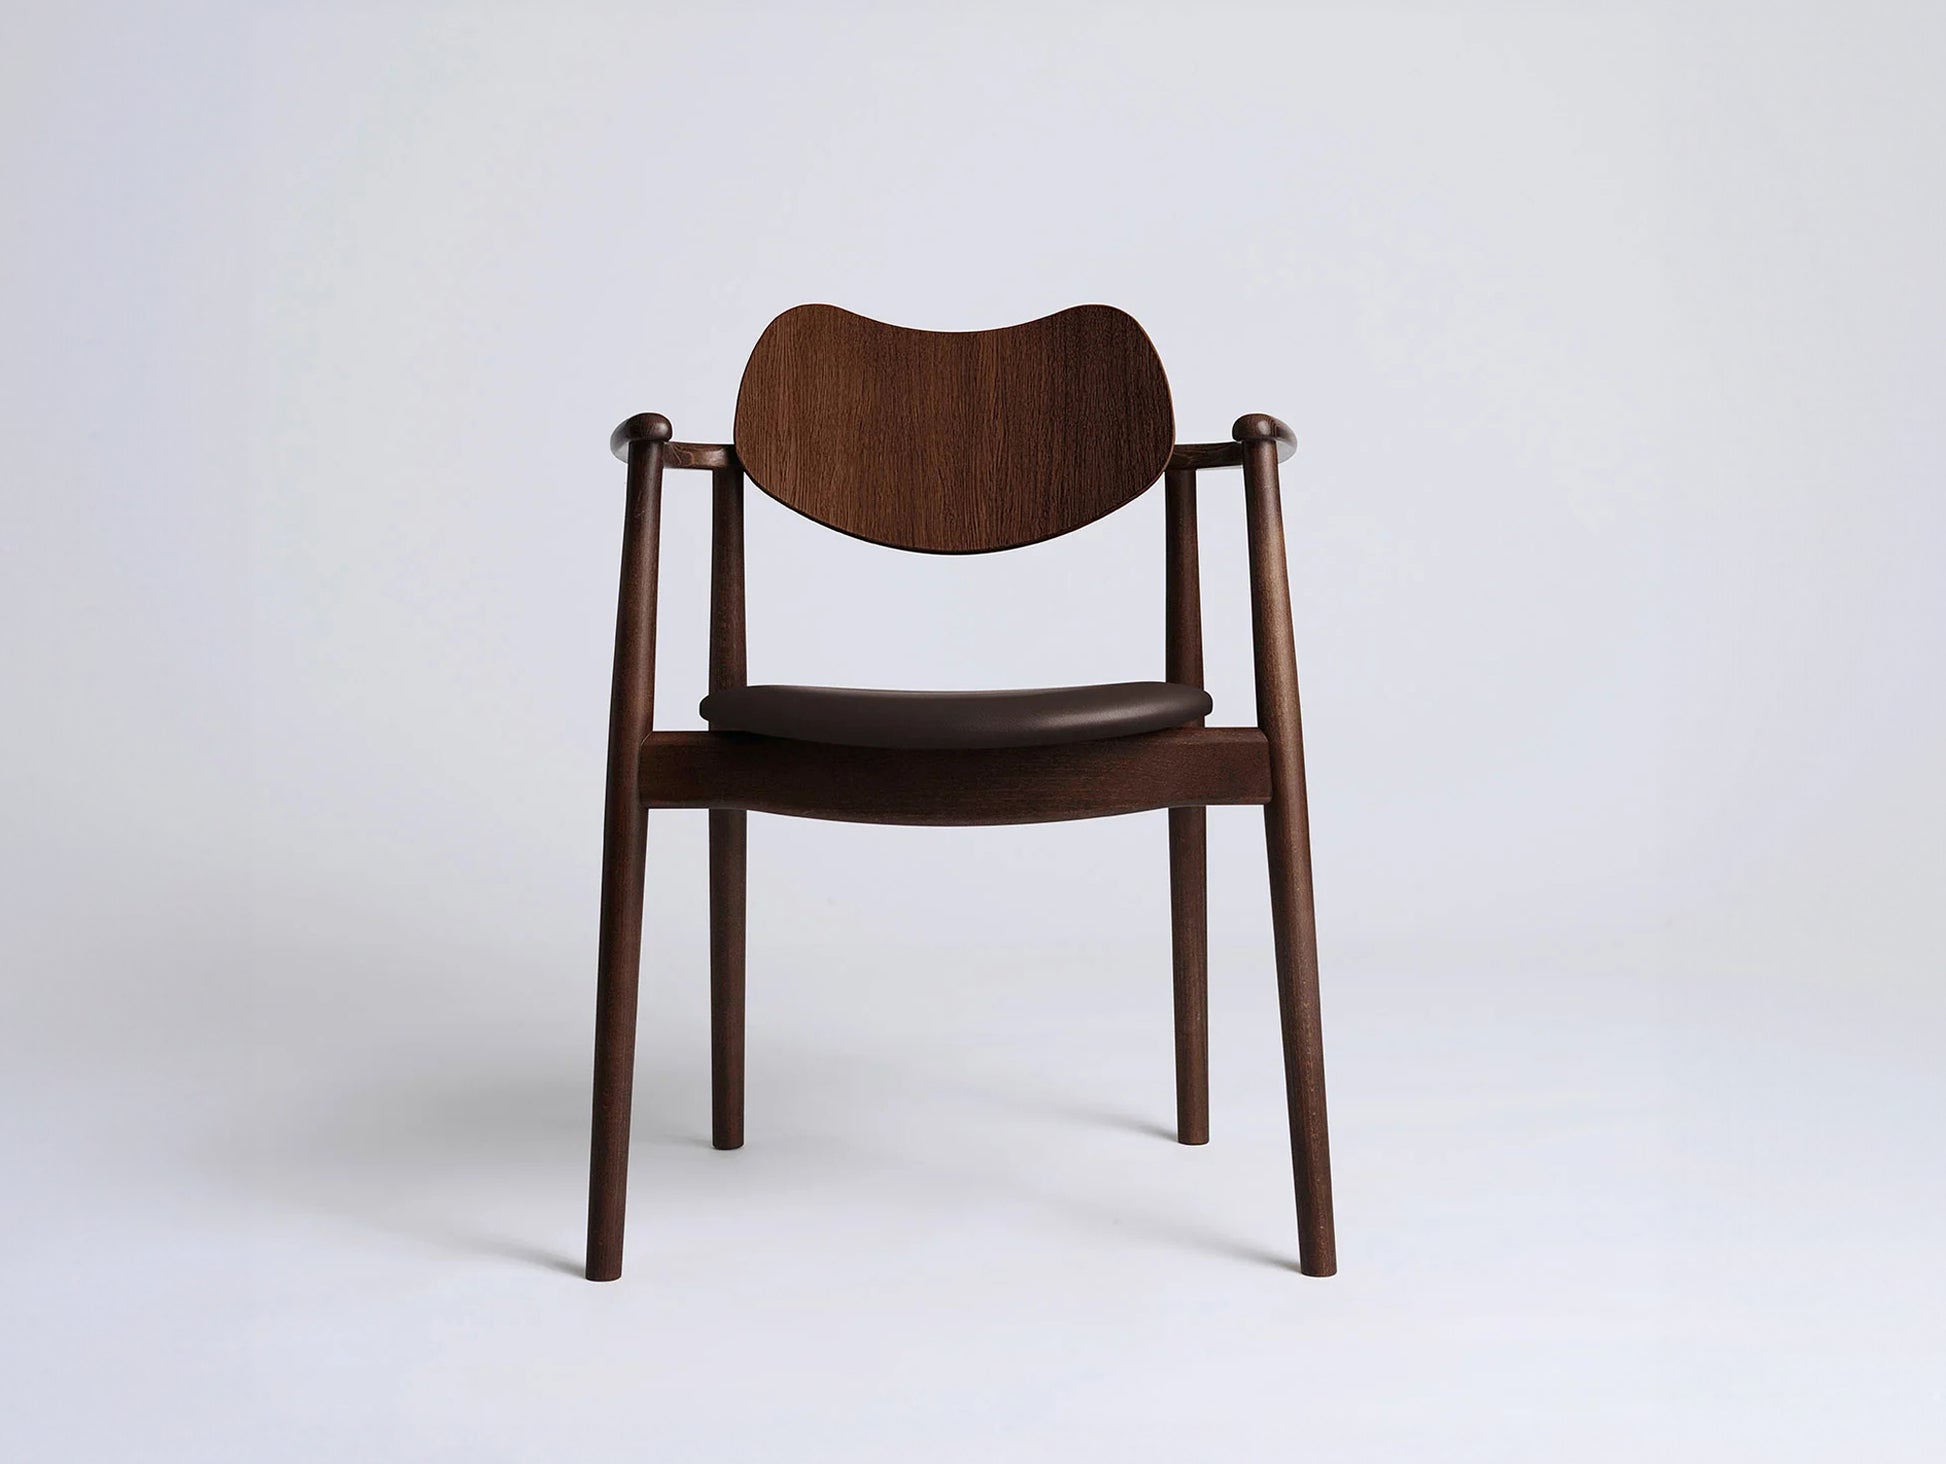 Regatta Chair Seat Upholstered by Ro Collection - Walnut Stained Beech / Exclusive Chocolate Brown Leather